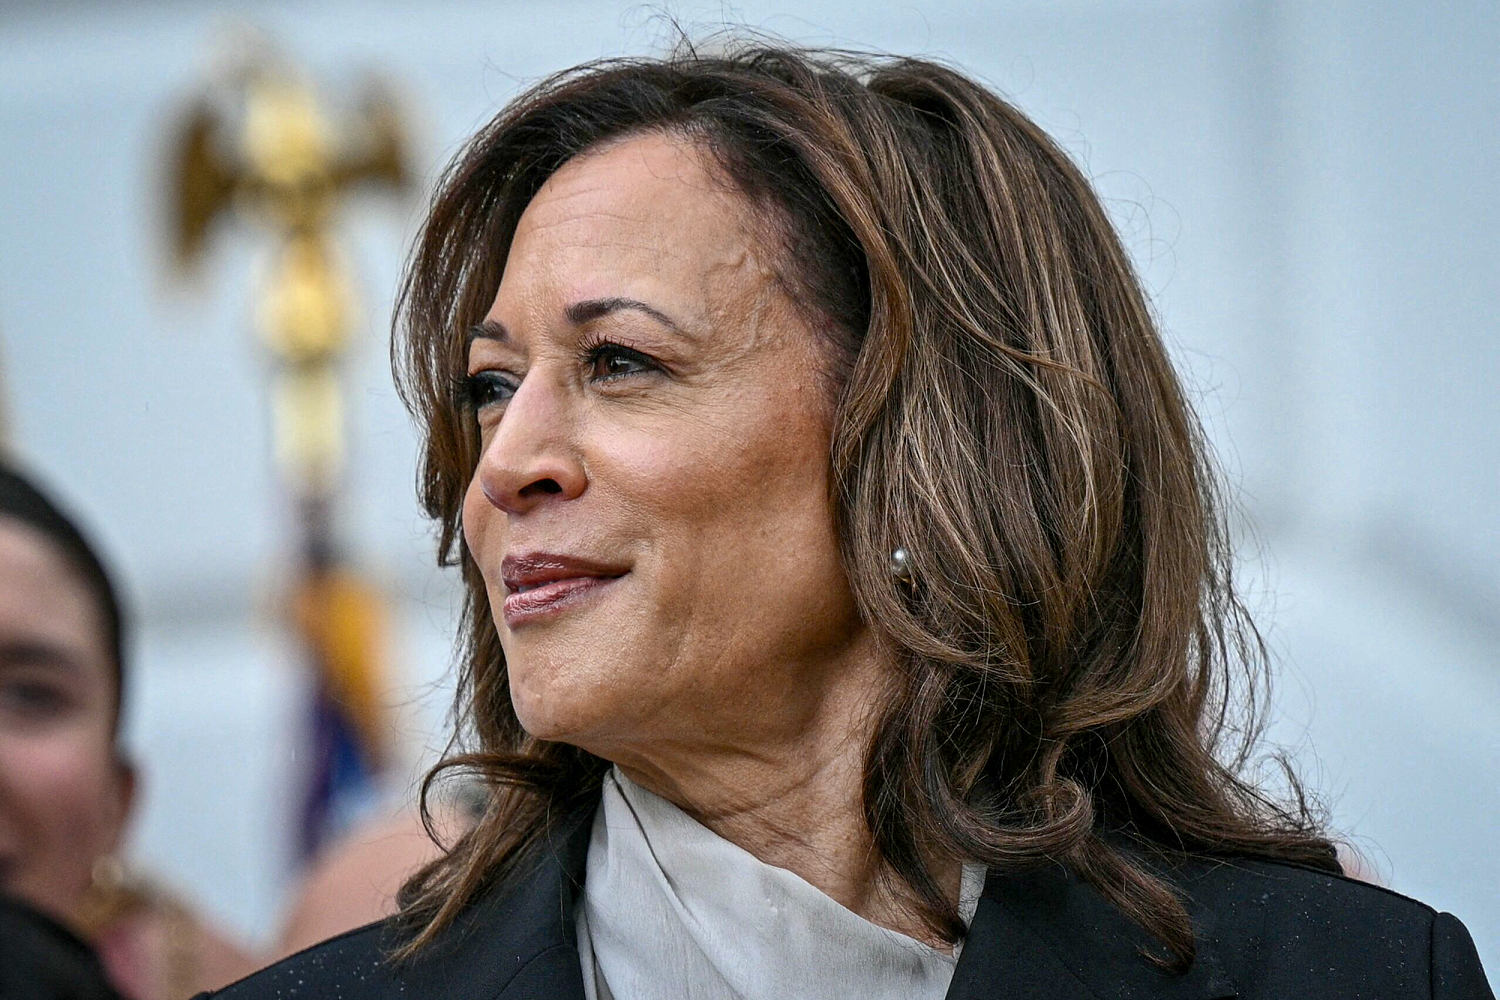 Harris' candidacy reshapes strategies for key House and Senate races